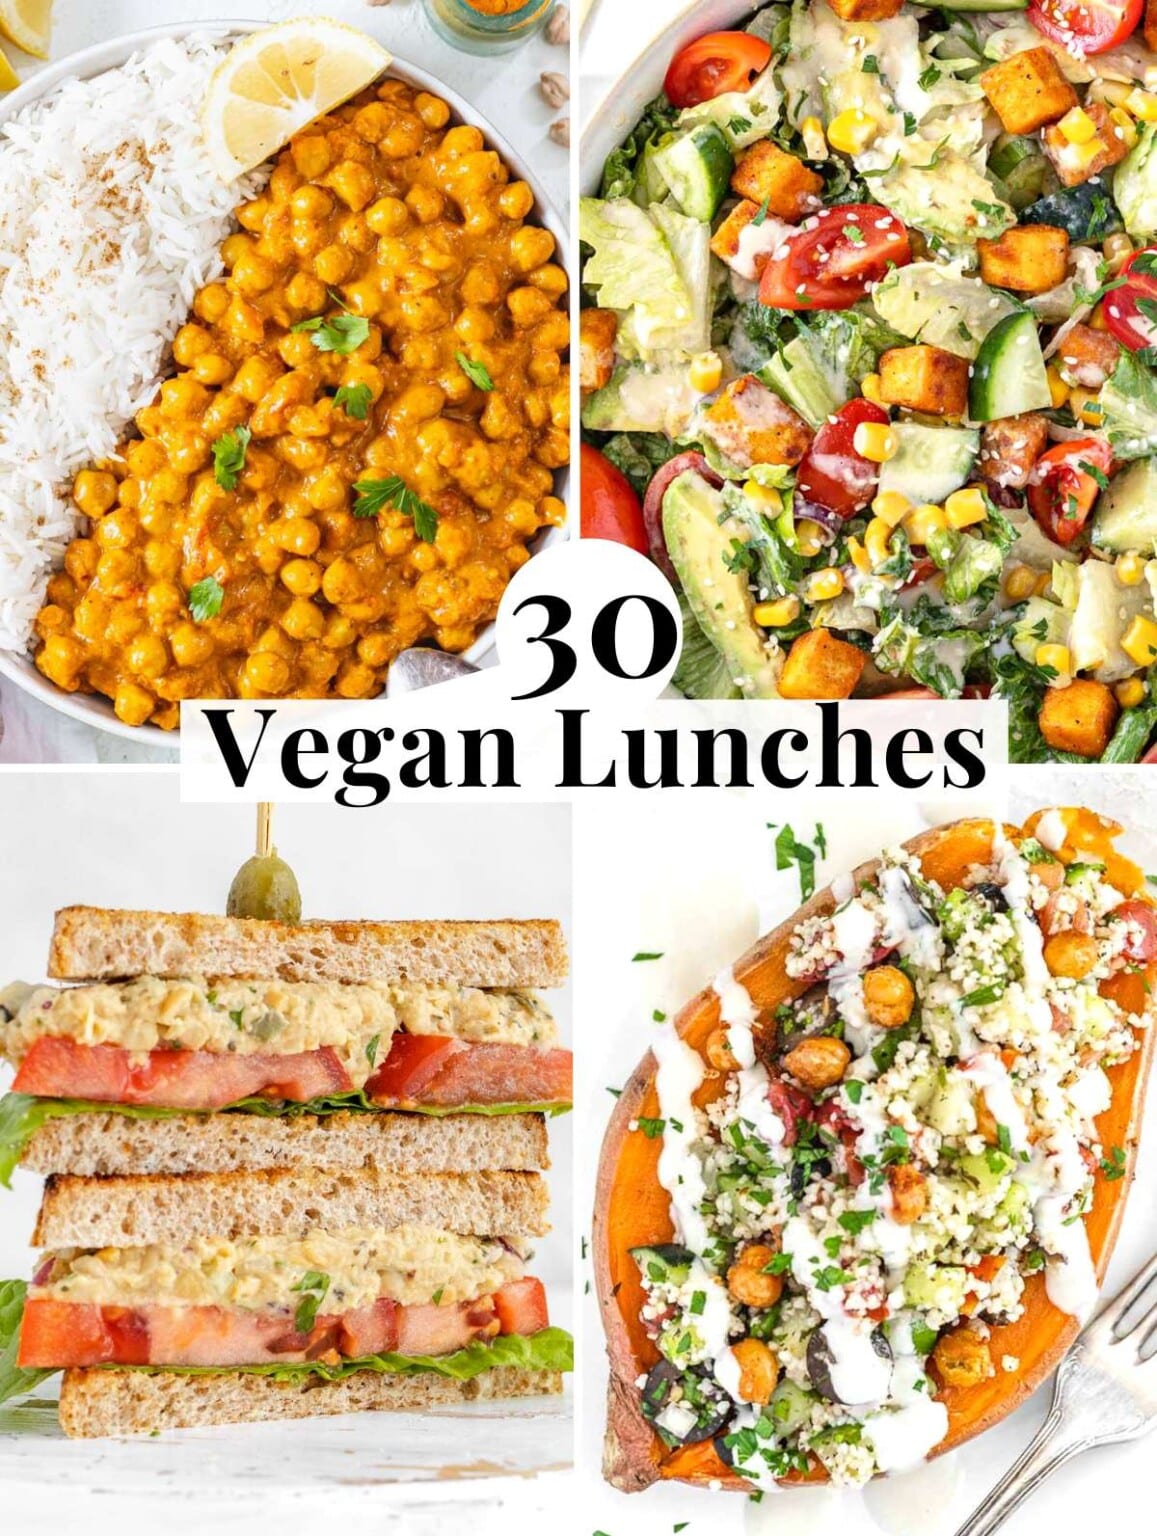 30 Vegan Lunch Ideas to Spice Up Your Meals (easy recipes)